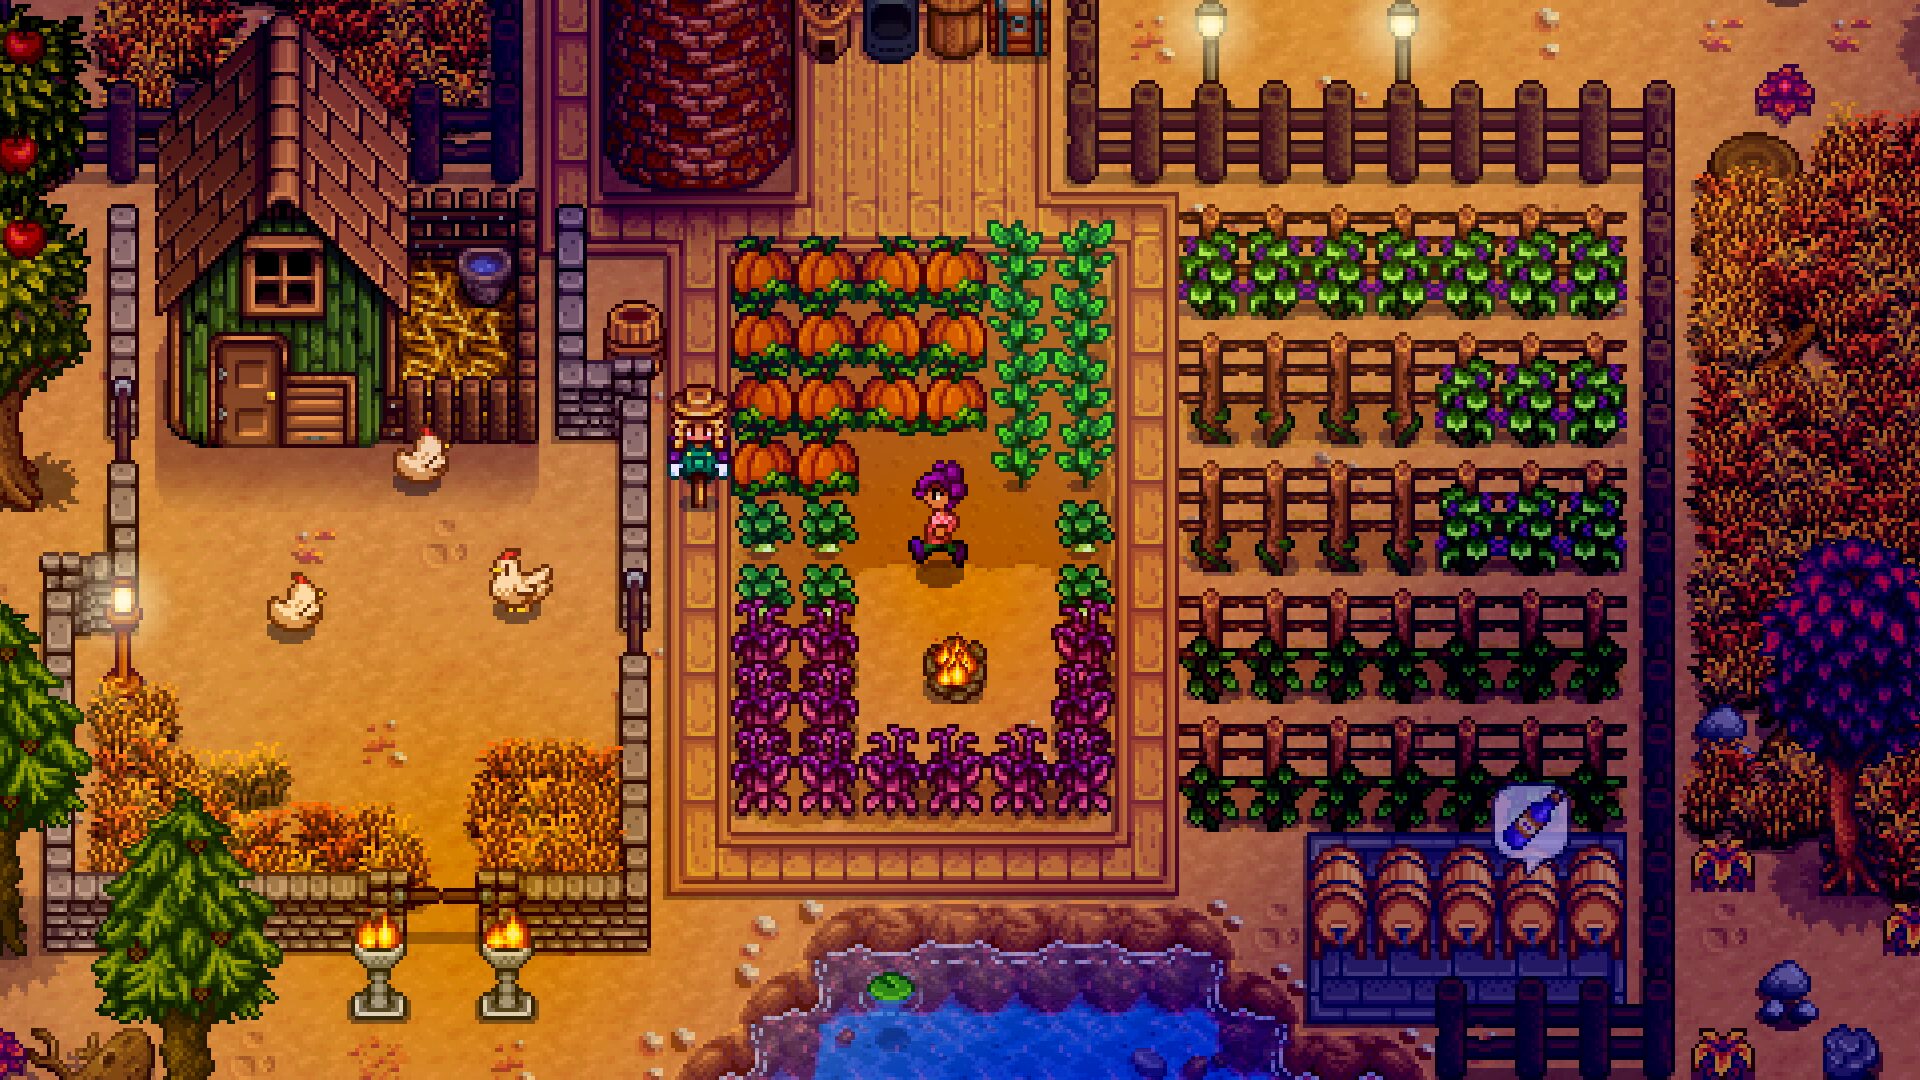 Stardew Valley Dev Making Progress on Multiplayer, But May Take Time on PS4